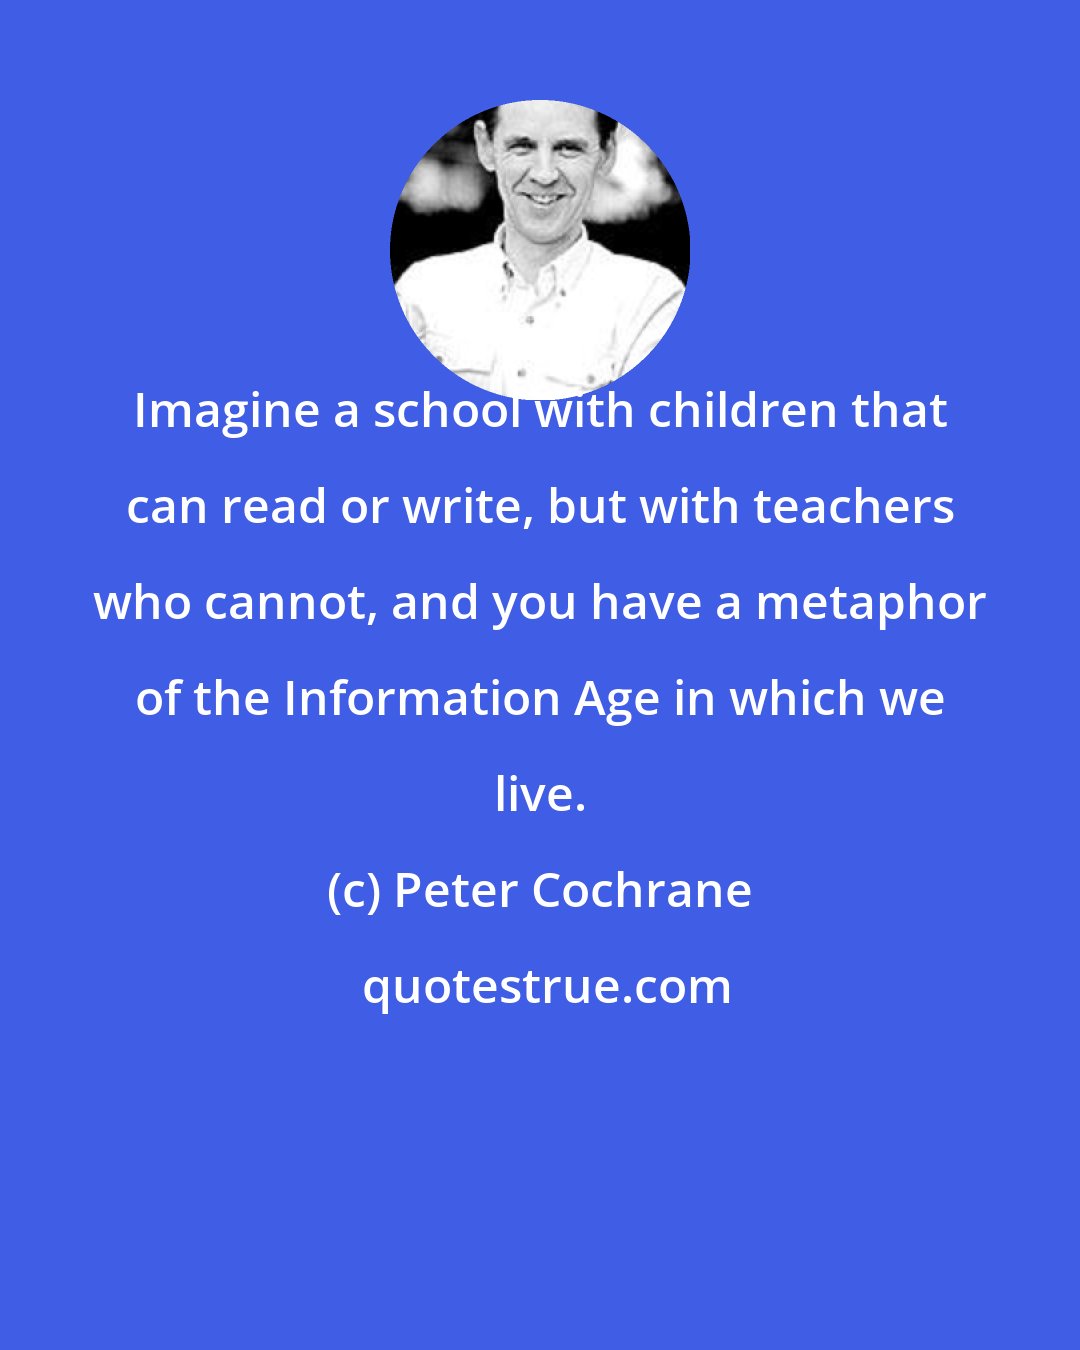 Peter Cochrane: Imagine a school with children that can read or write, but with teachers who cannot, and you have a metaphor of the Information Age in which we live.